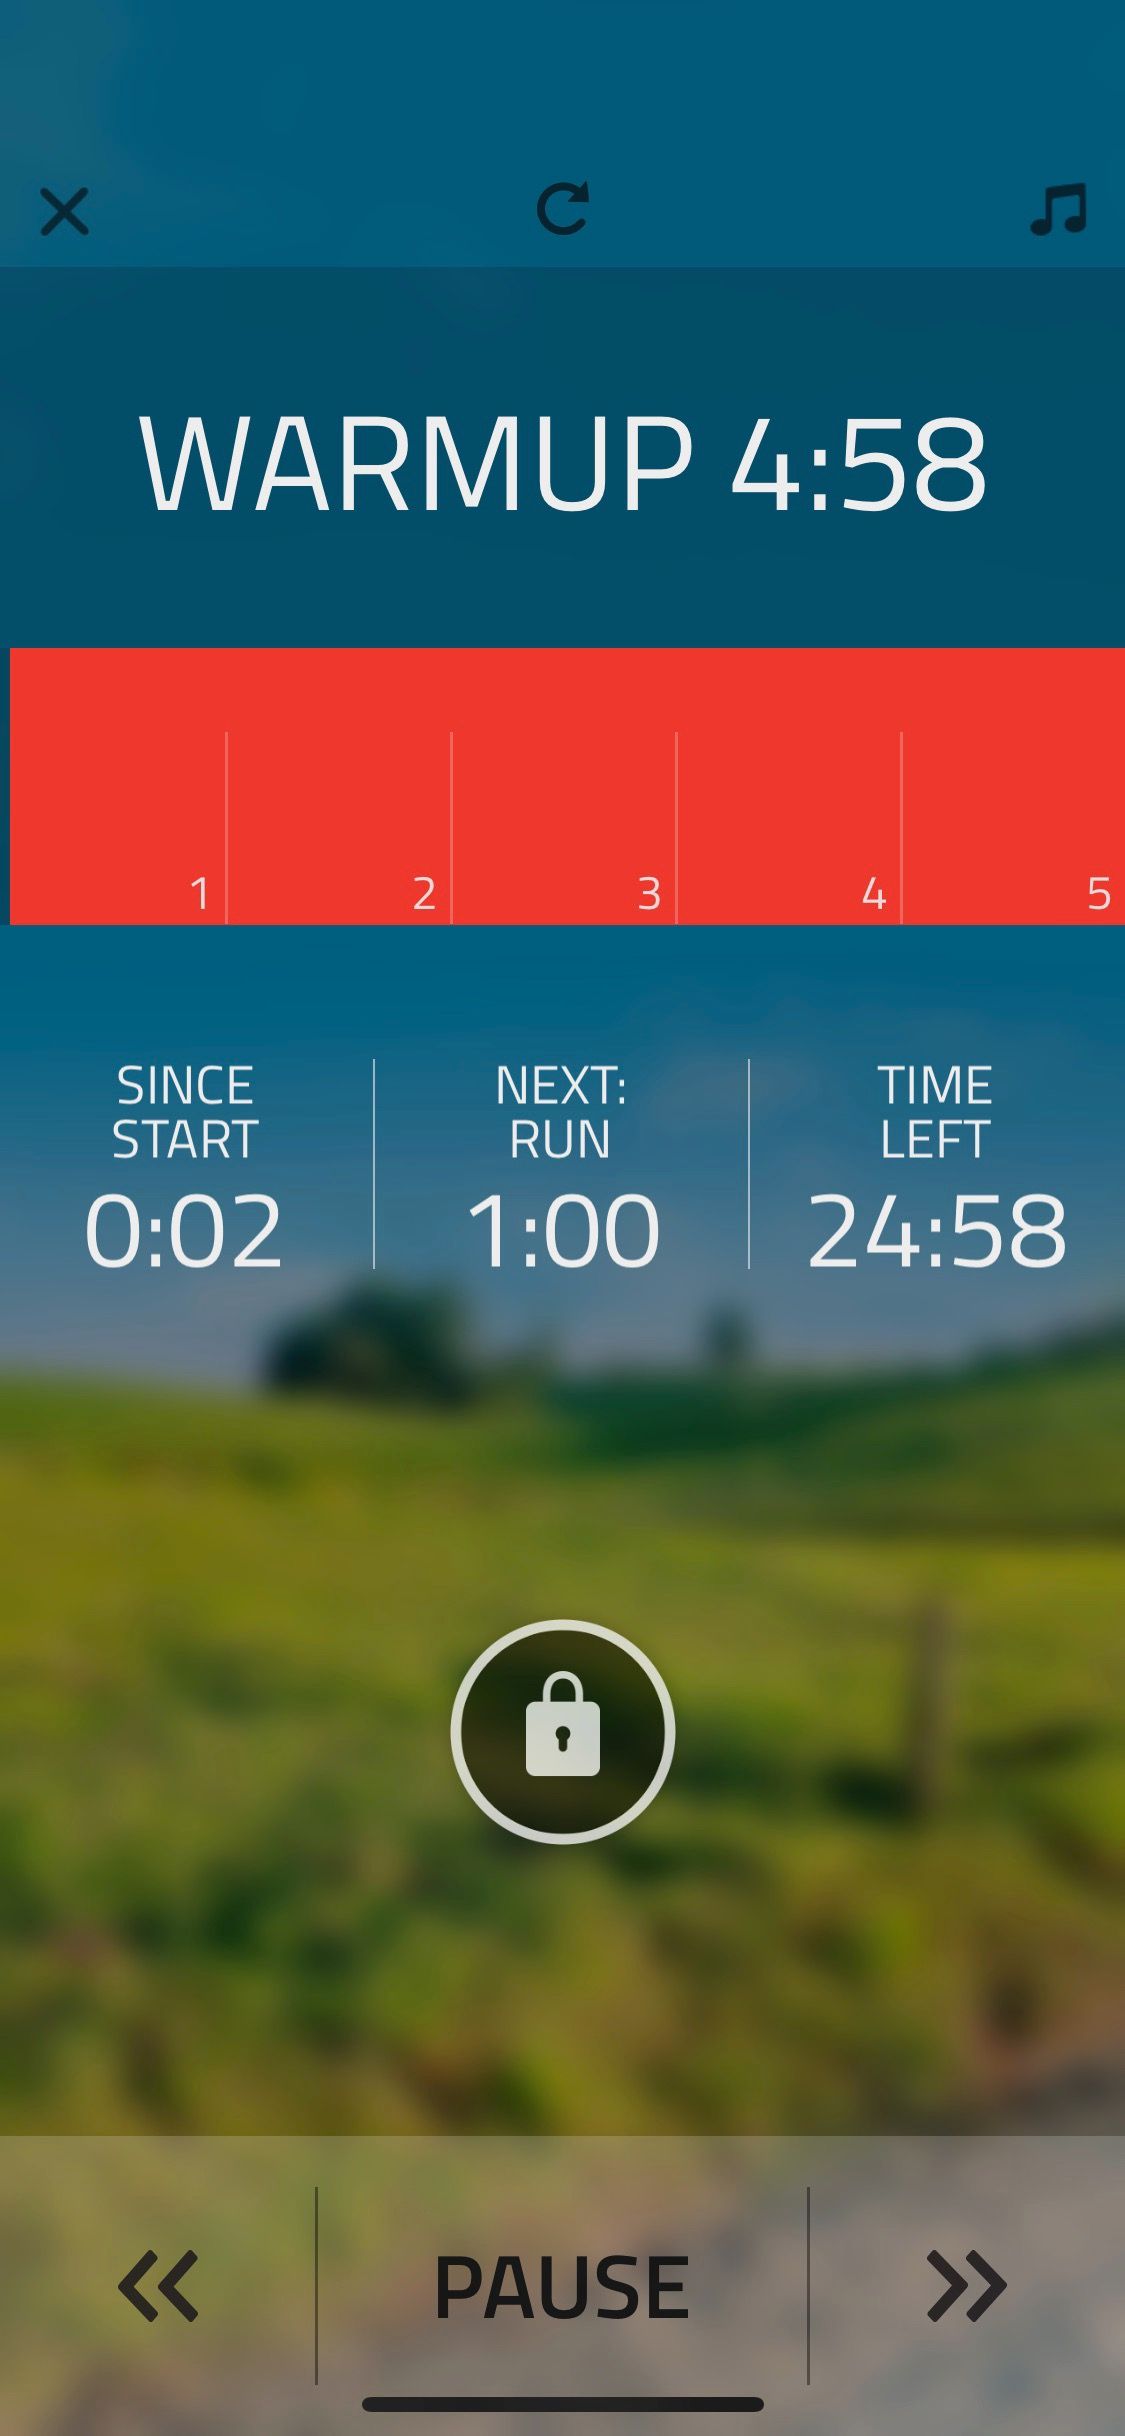 Screenshot of Couch to 5k app showing warmup recording screen